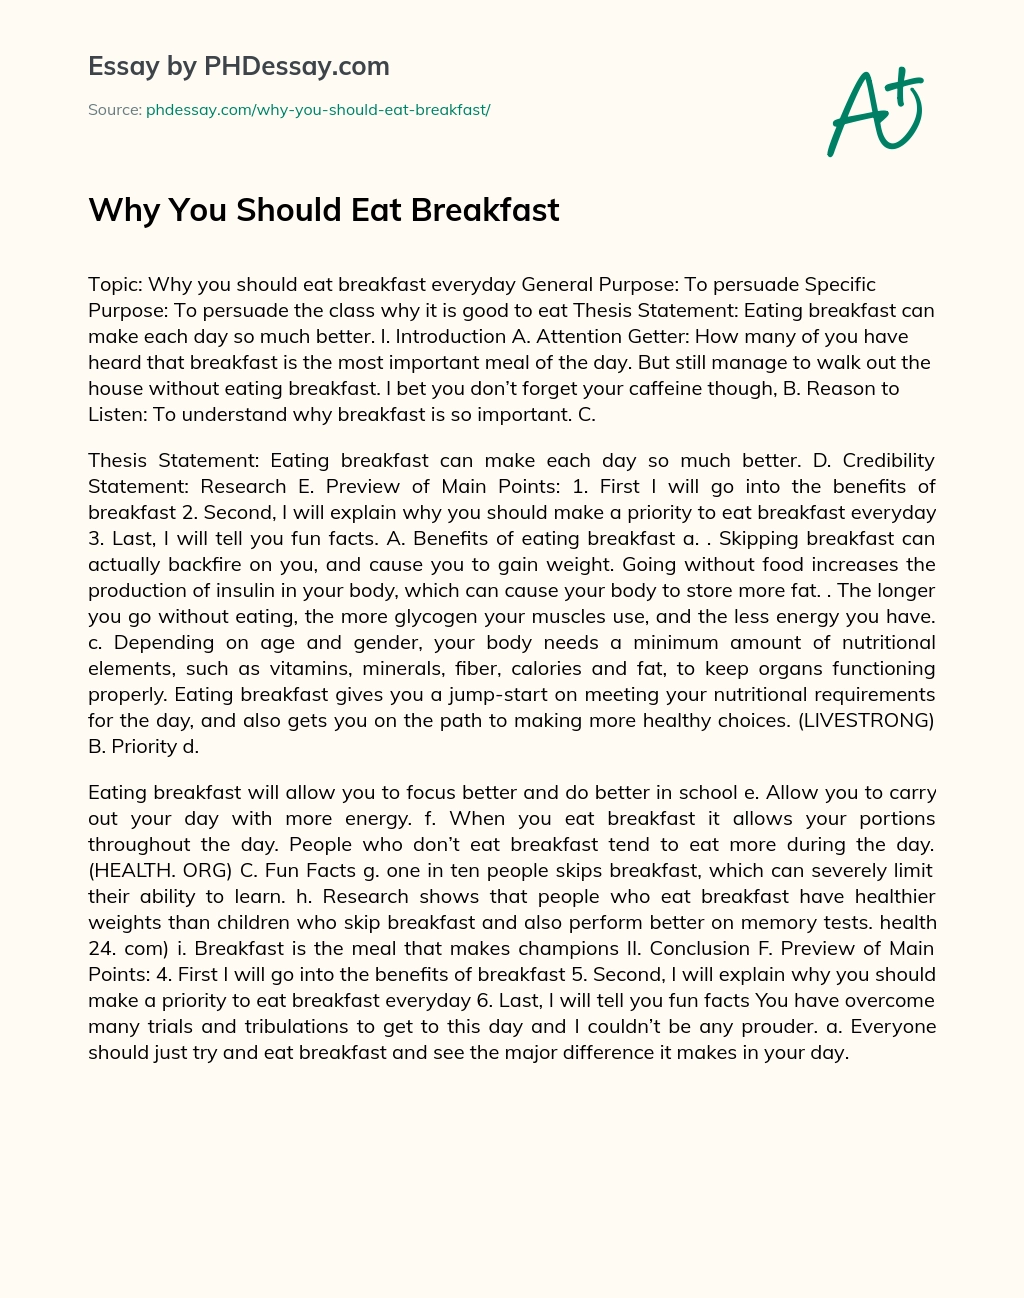 Why You Should Eat Breakfast essay